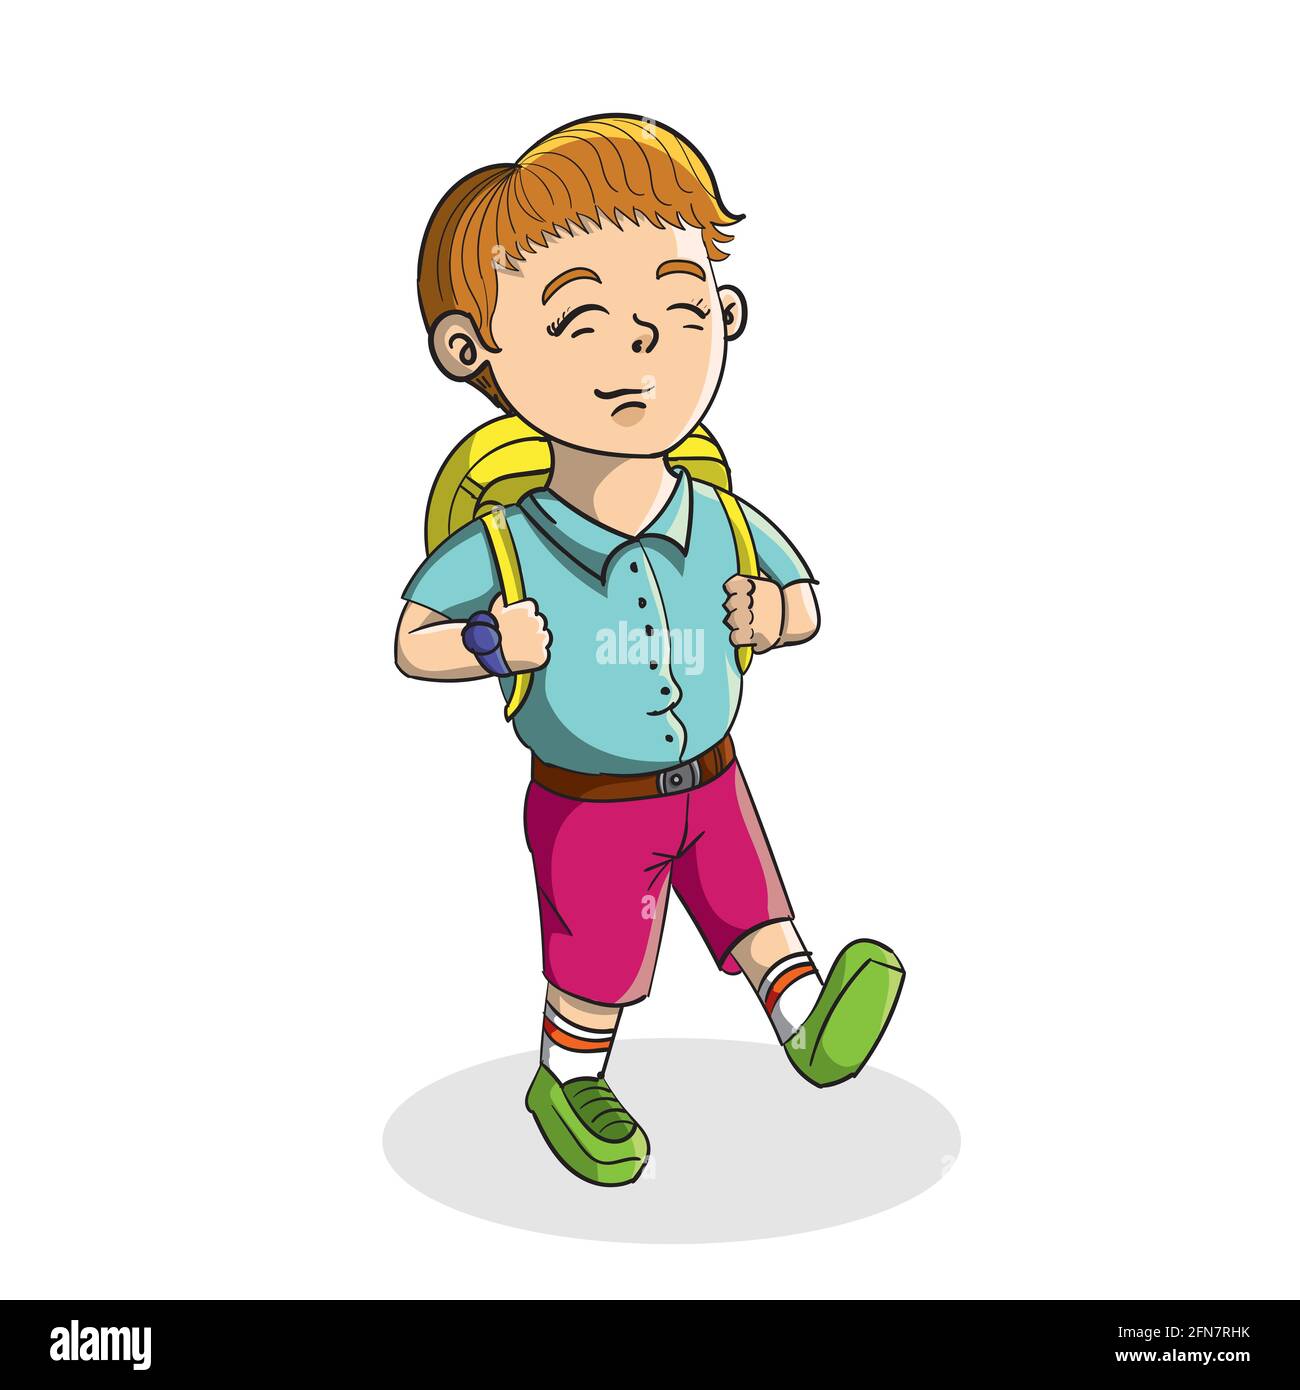 An illustration of school boy vector character wearing uniform and bag while walking to school Stock Vector